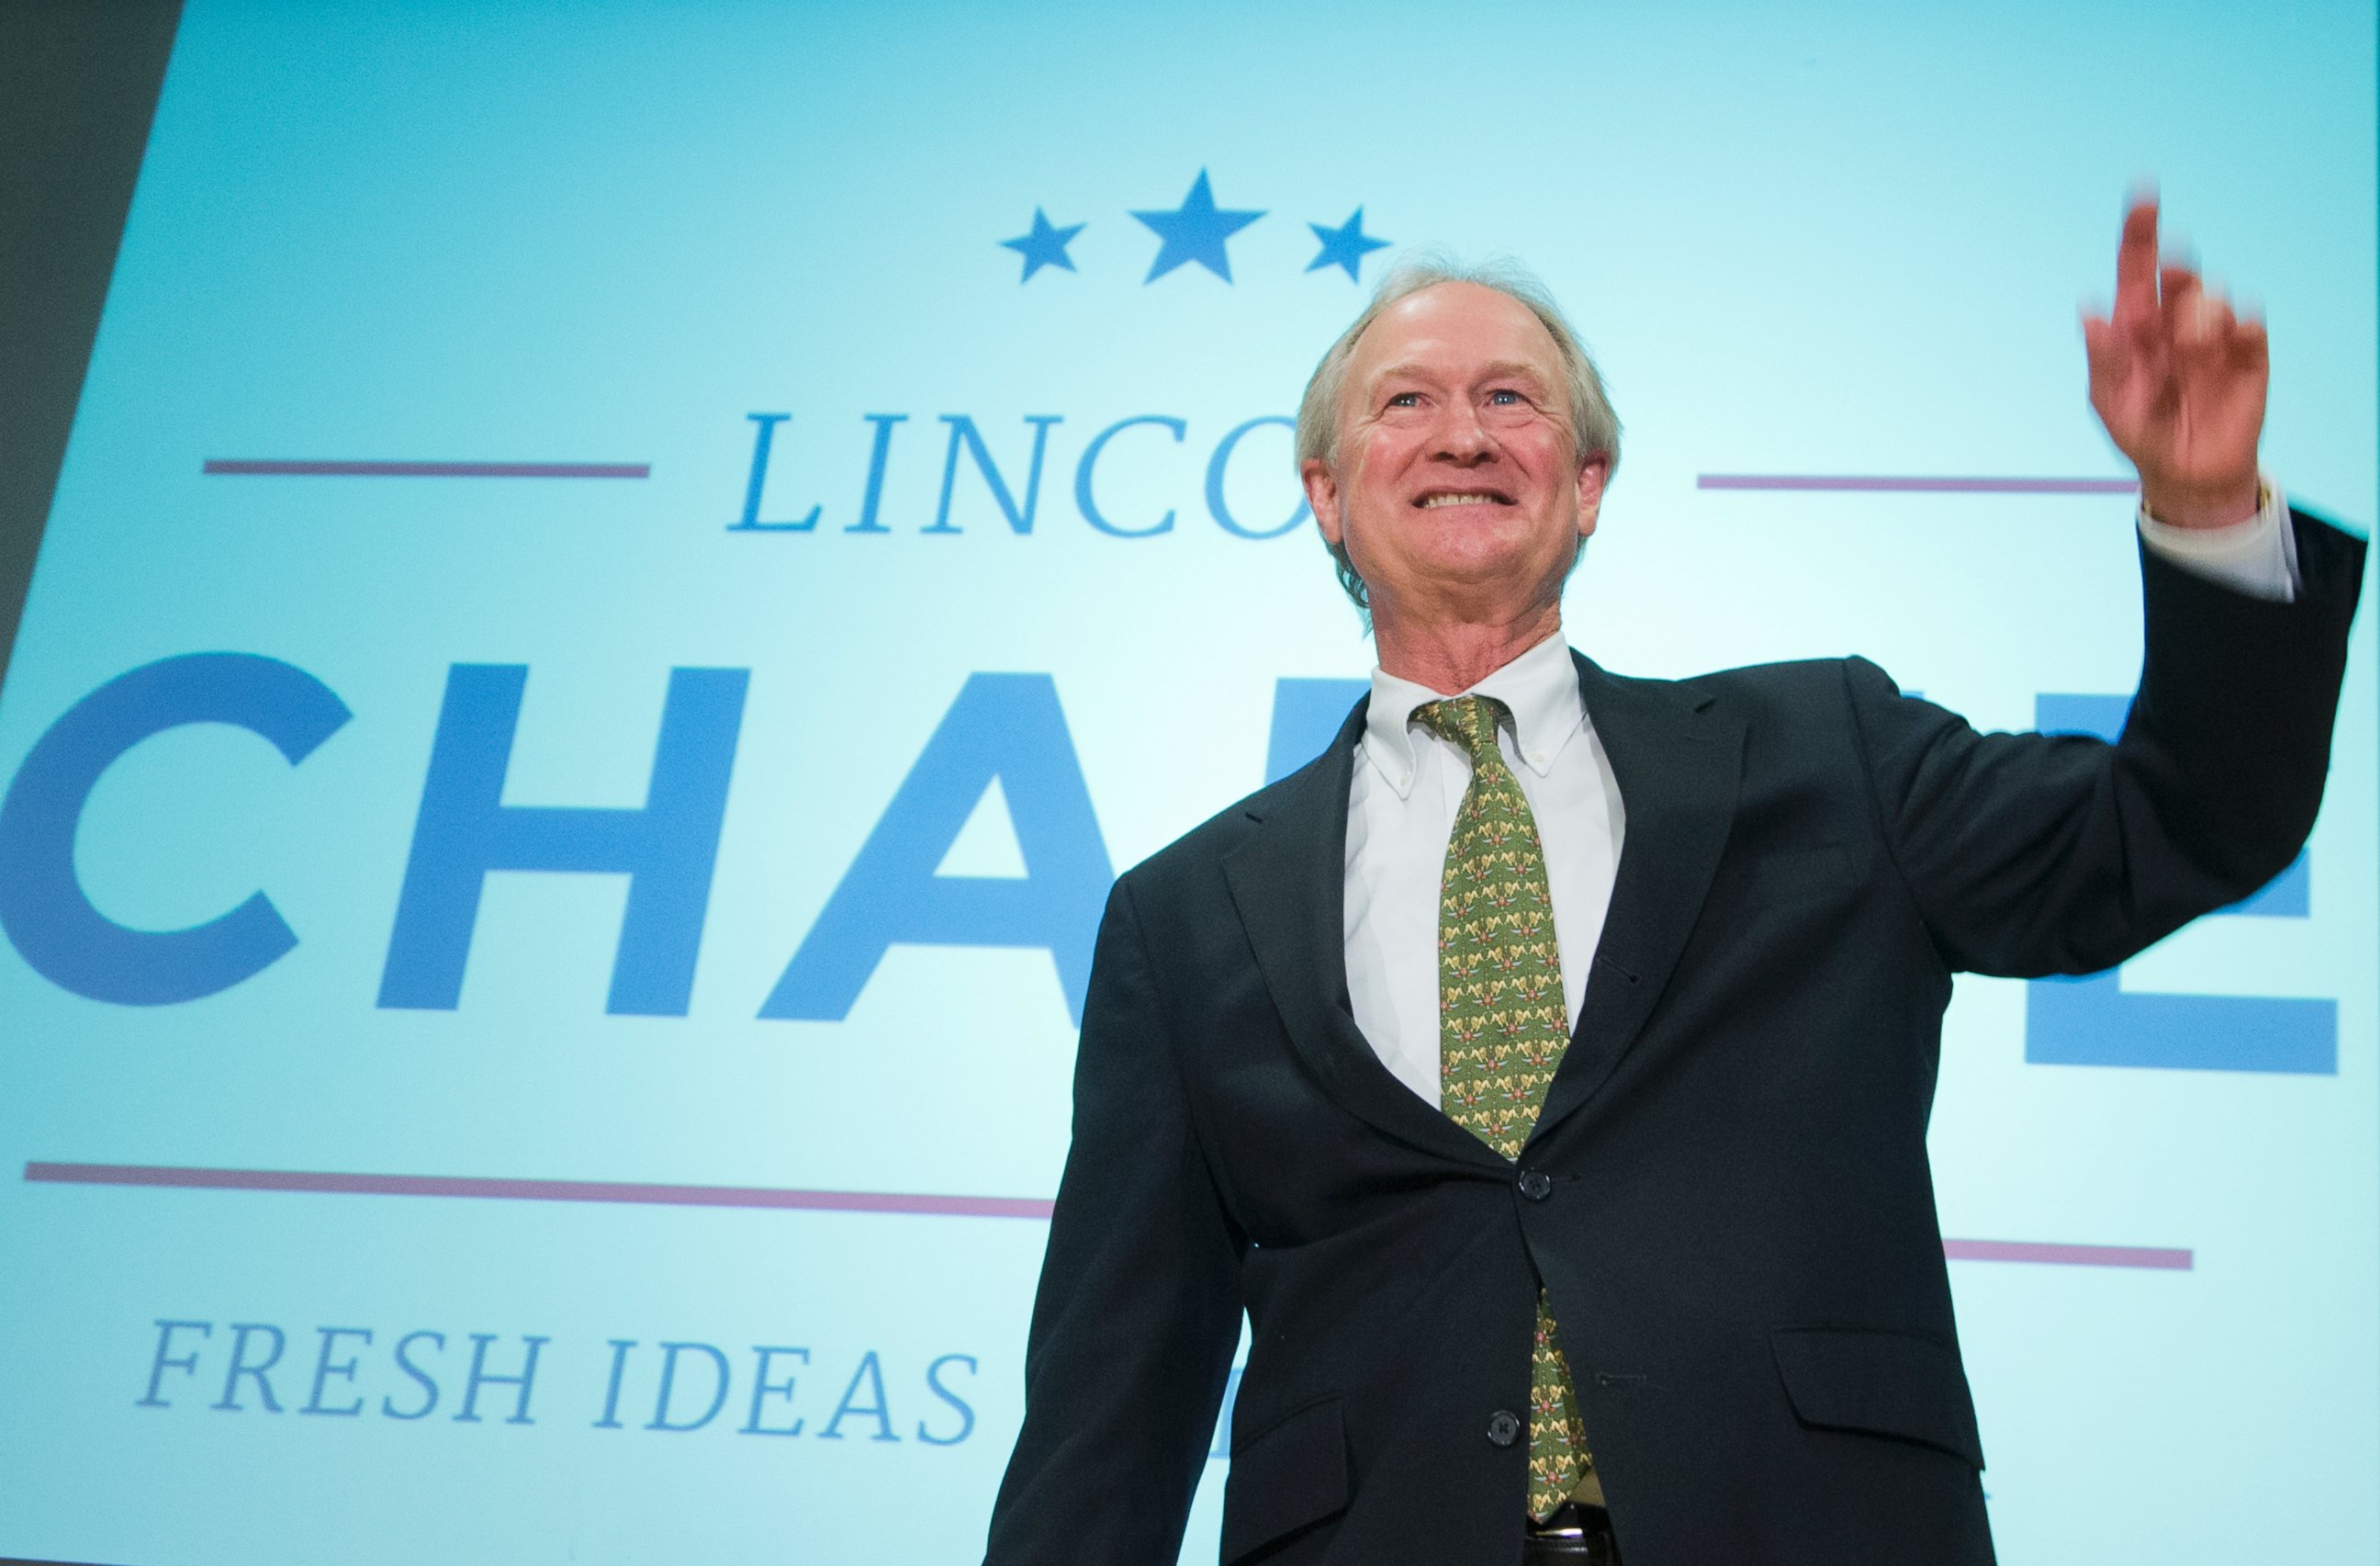 PHOTO: Former Rhode Island Gov. Lincoln Chafee, waves after announcing his candidacy for the Democratic presidential nomination during a speech at George Mason University in Arlington, Va., June 3, 2015